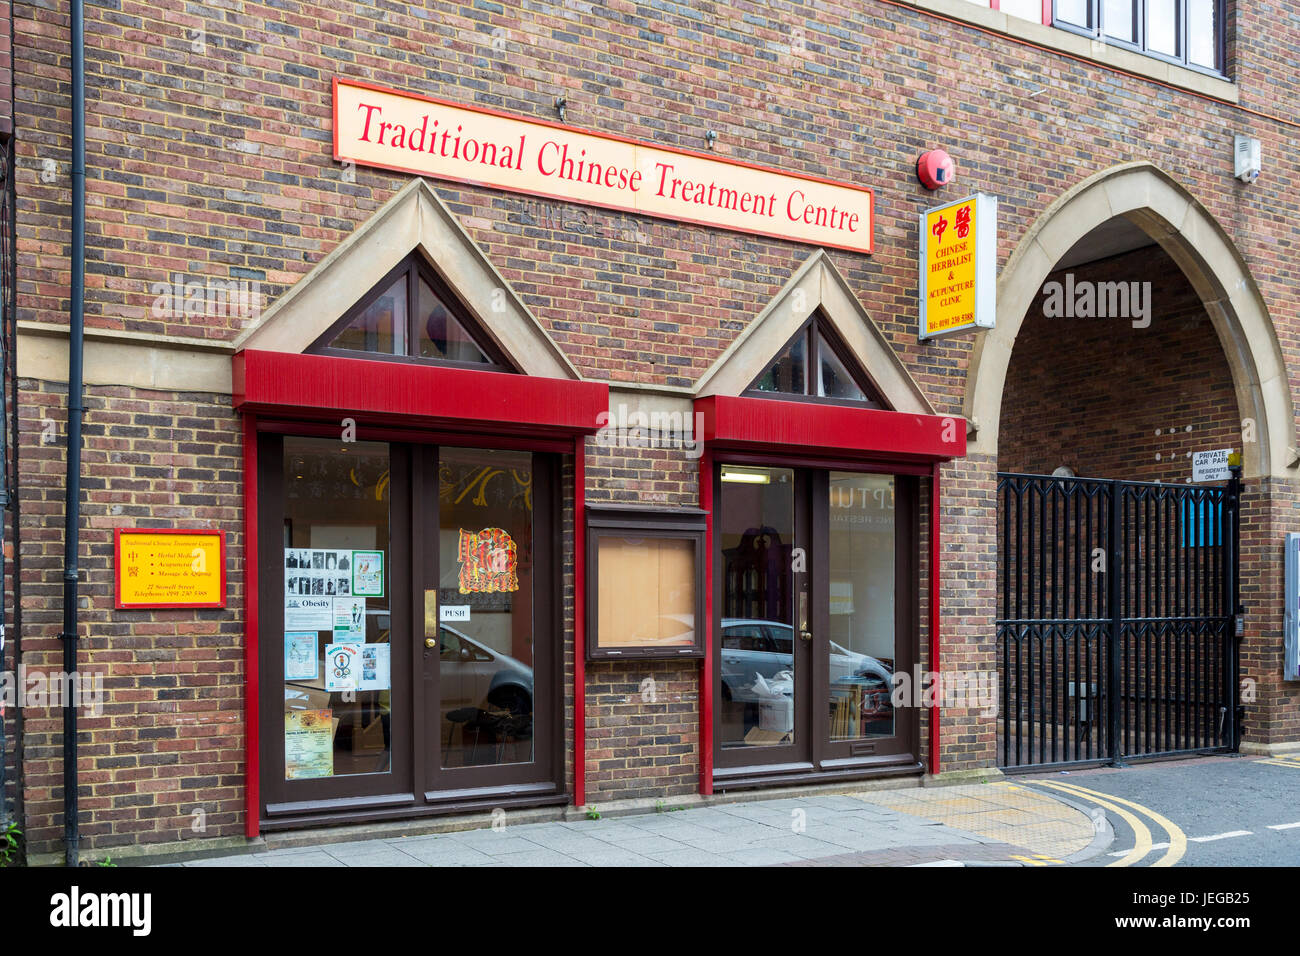 Newcastle-upon-Tyne, England, UK.  Chinatown Herbalist and Acupuncture Center, Traditional Medicine. Stock Photo